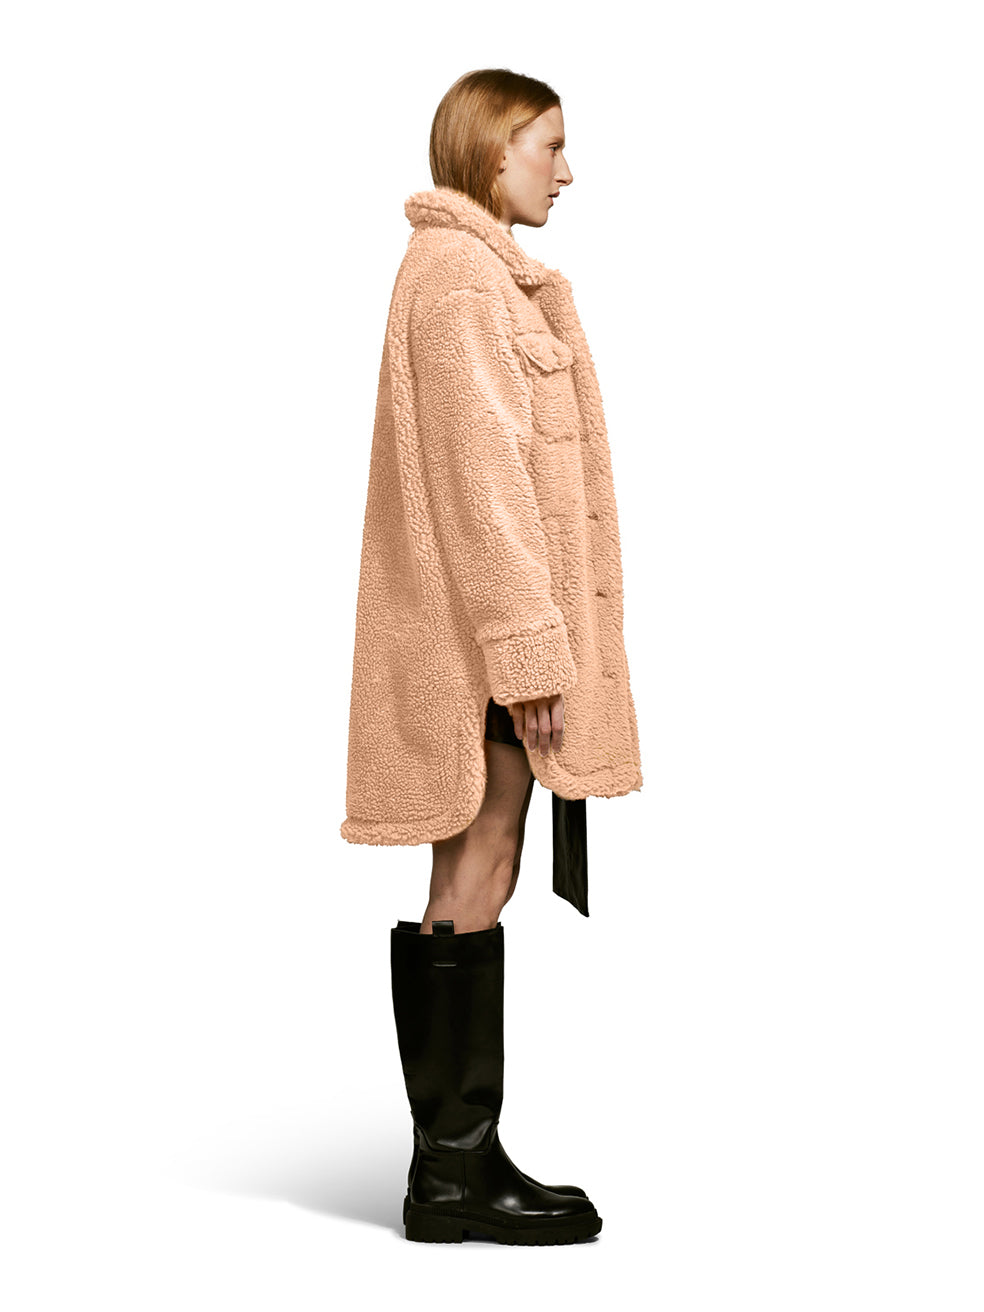 Model wearing the Ash, a teddy-inspired faux-fur sherpa shell with a laid-back silhouette in Camel from the Side.